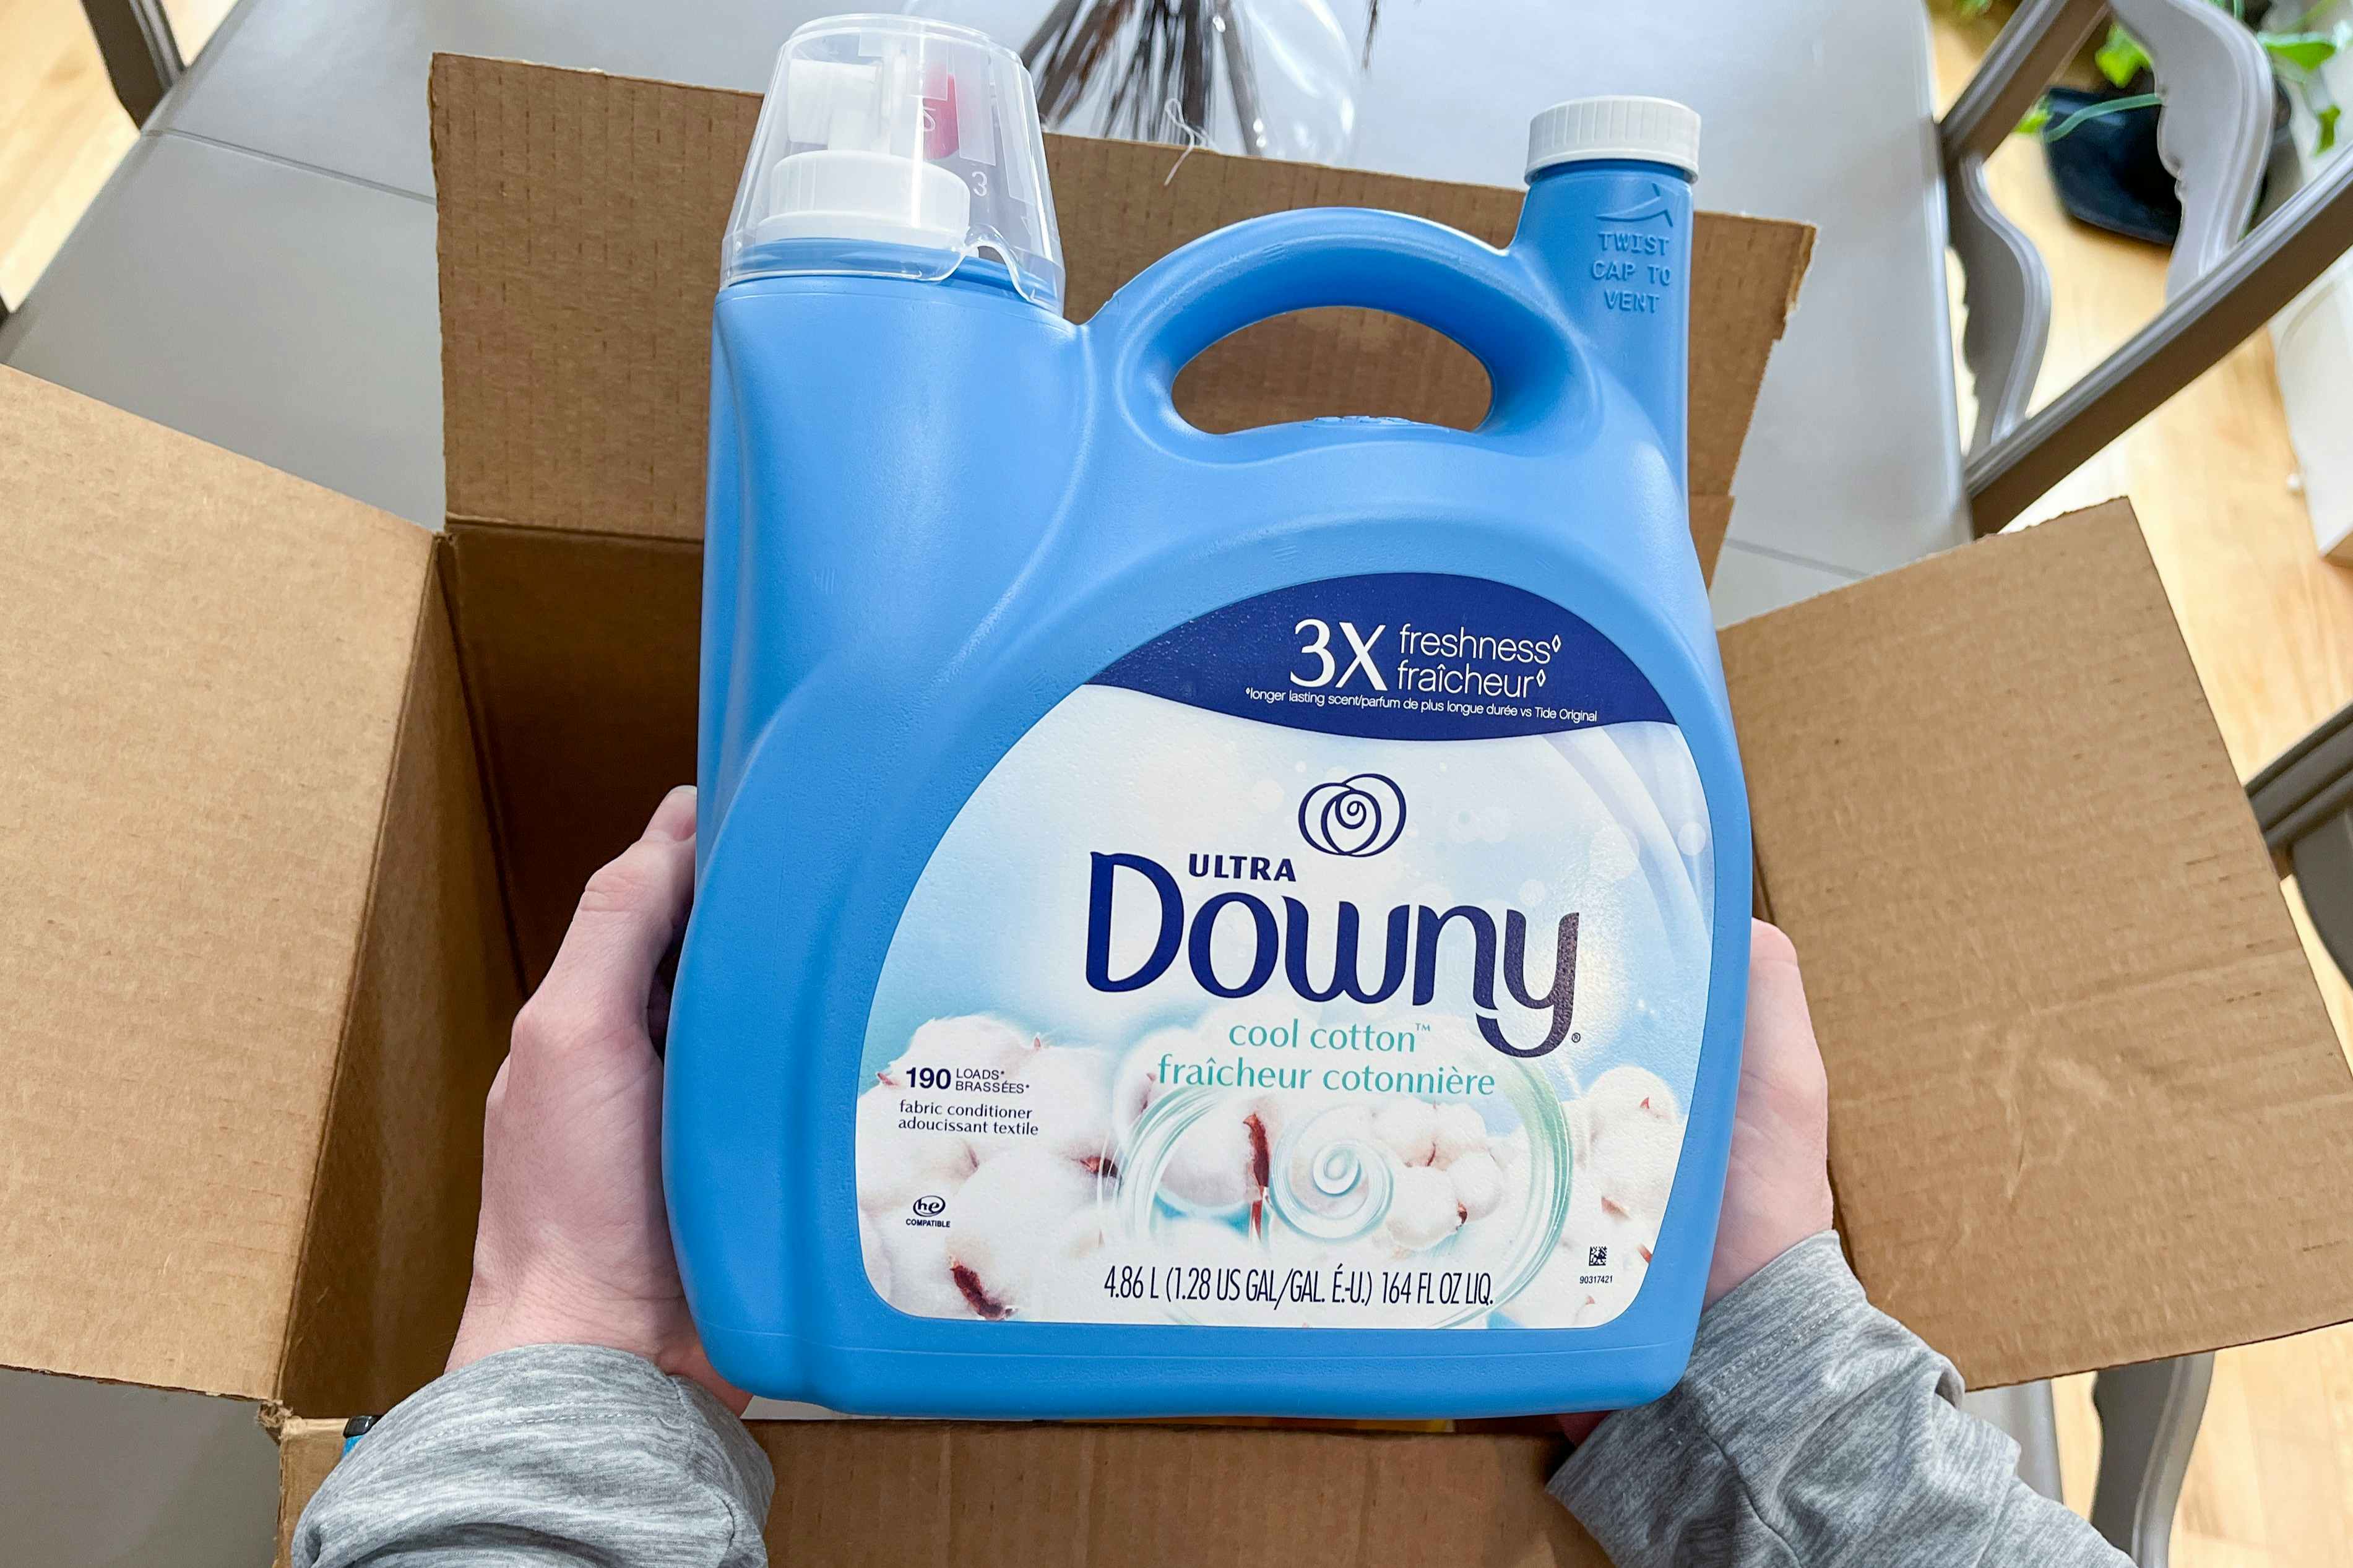 Downy Fabric Softener, as Low as $9 on Amazon